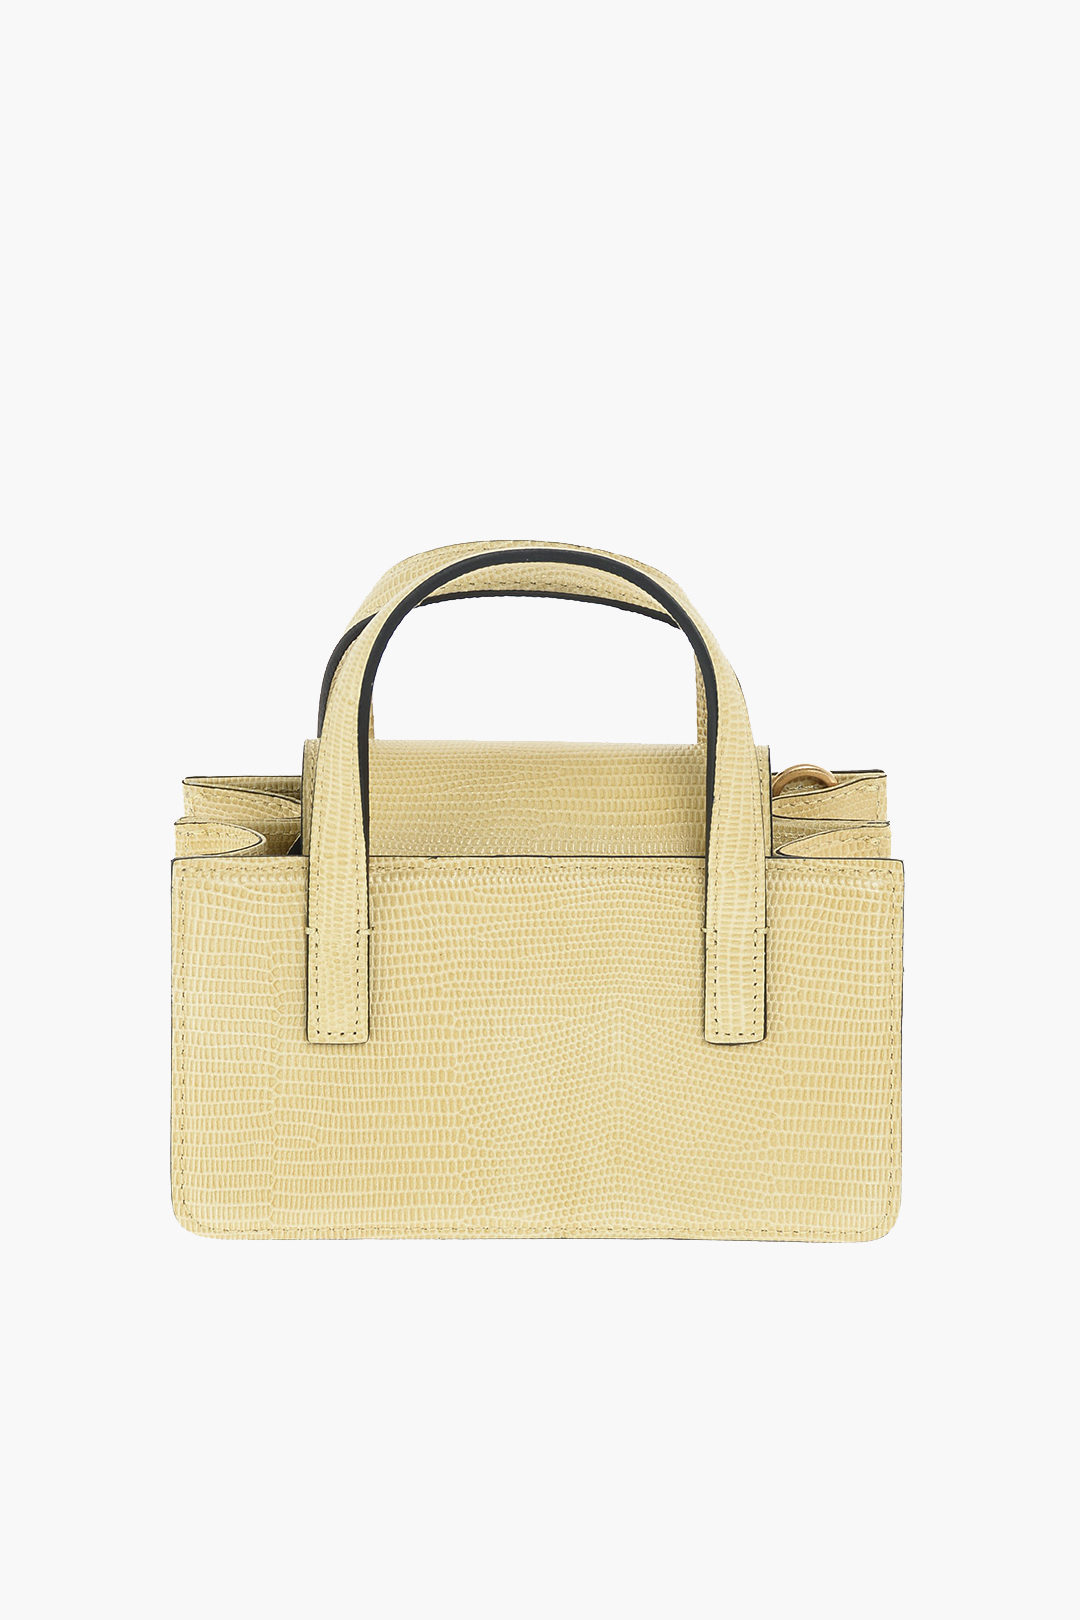 Shiny Croc Square Mini Bag by Marge Sherwood for $40